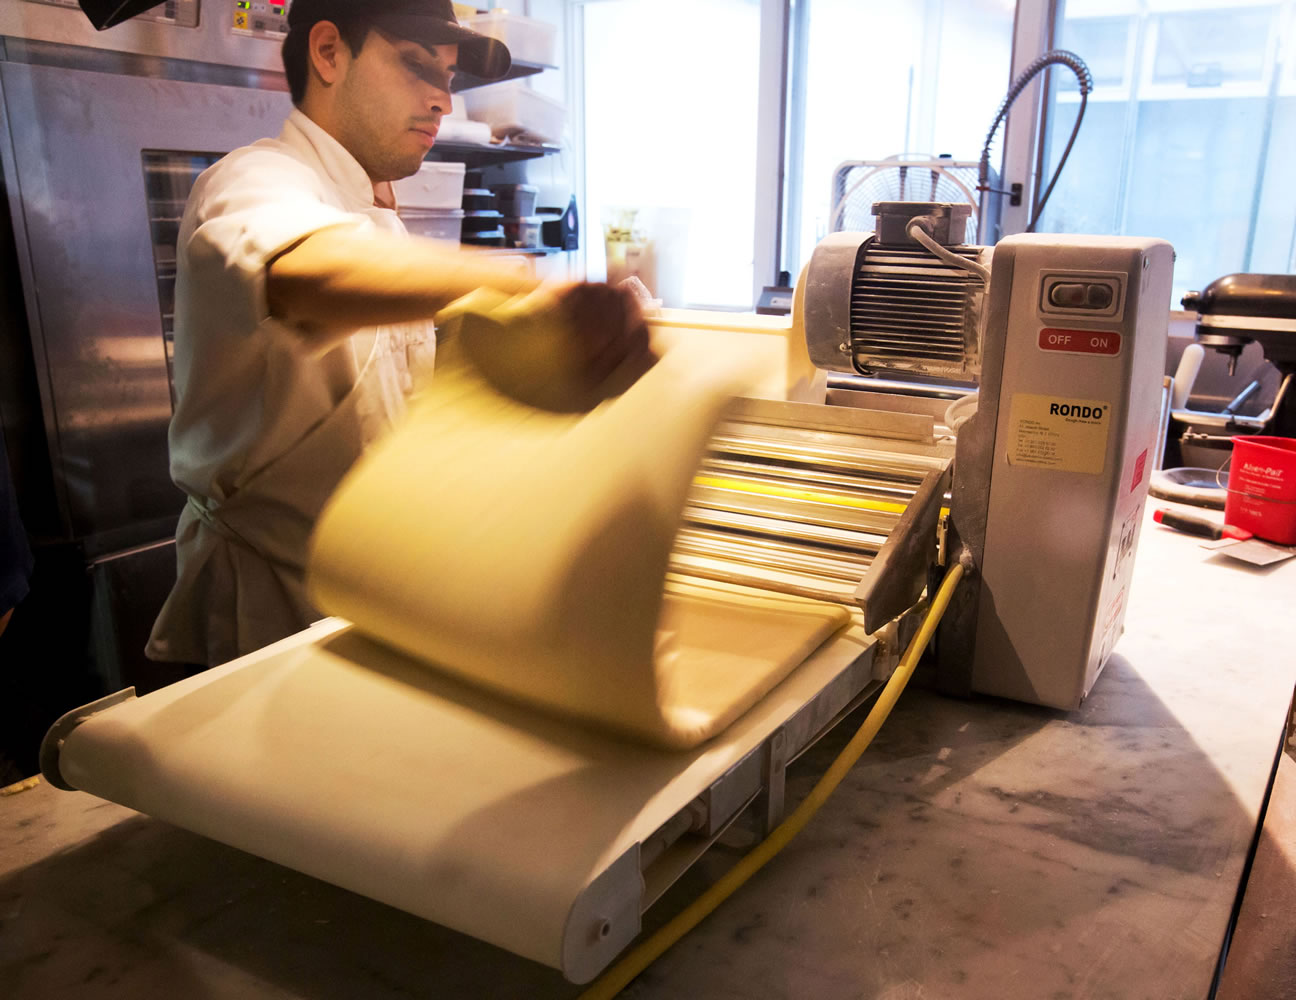 This June 3 photo shows a worker putting dough through a roller to make Cronuts, croissant-donut hybrid, at New York's Dominique Ansel Bakery in New York.